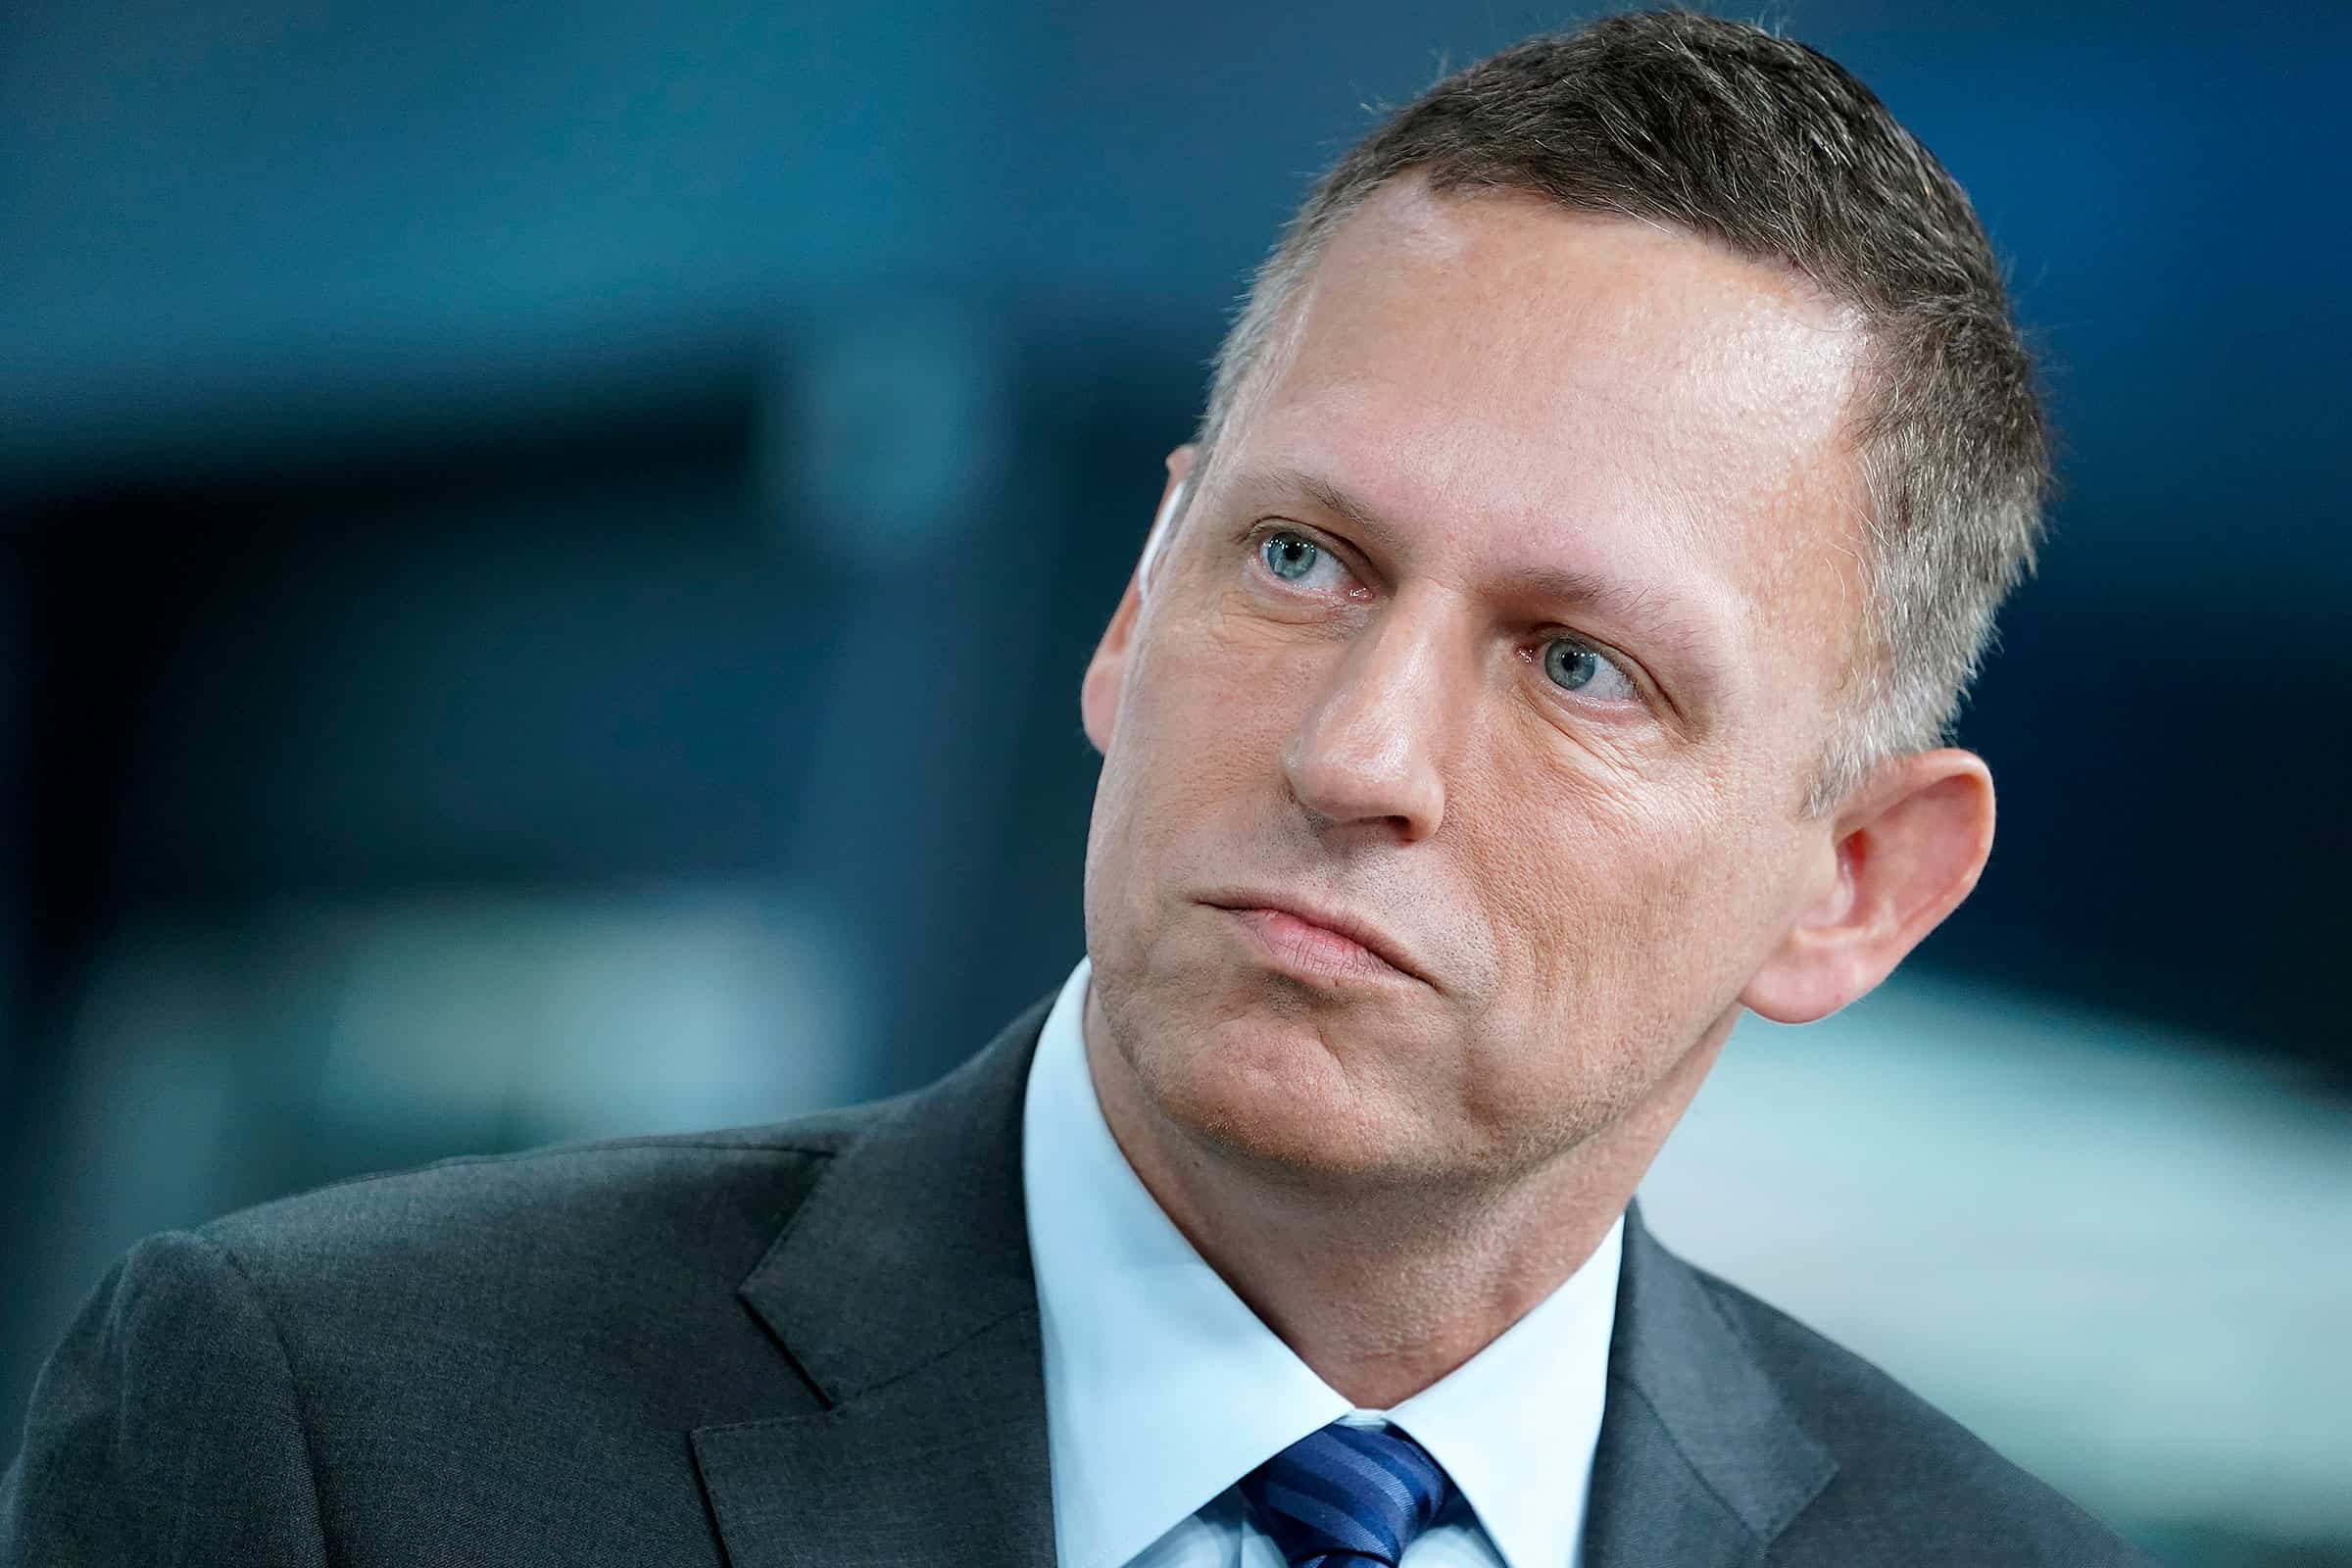 Being-only-pro-blockchain-is-an-anti-bitcoin-approach,-paypal-ceo-peter-thiel-says